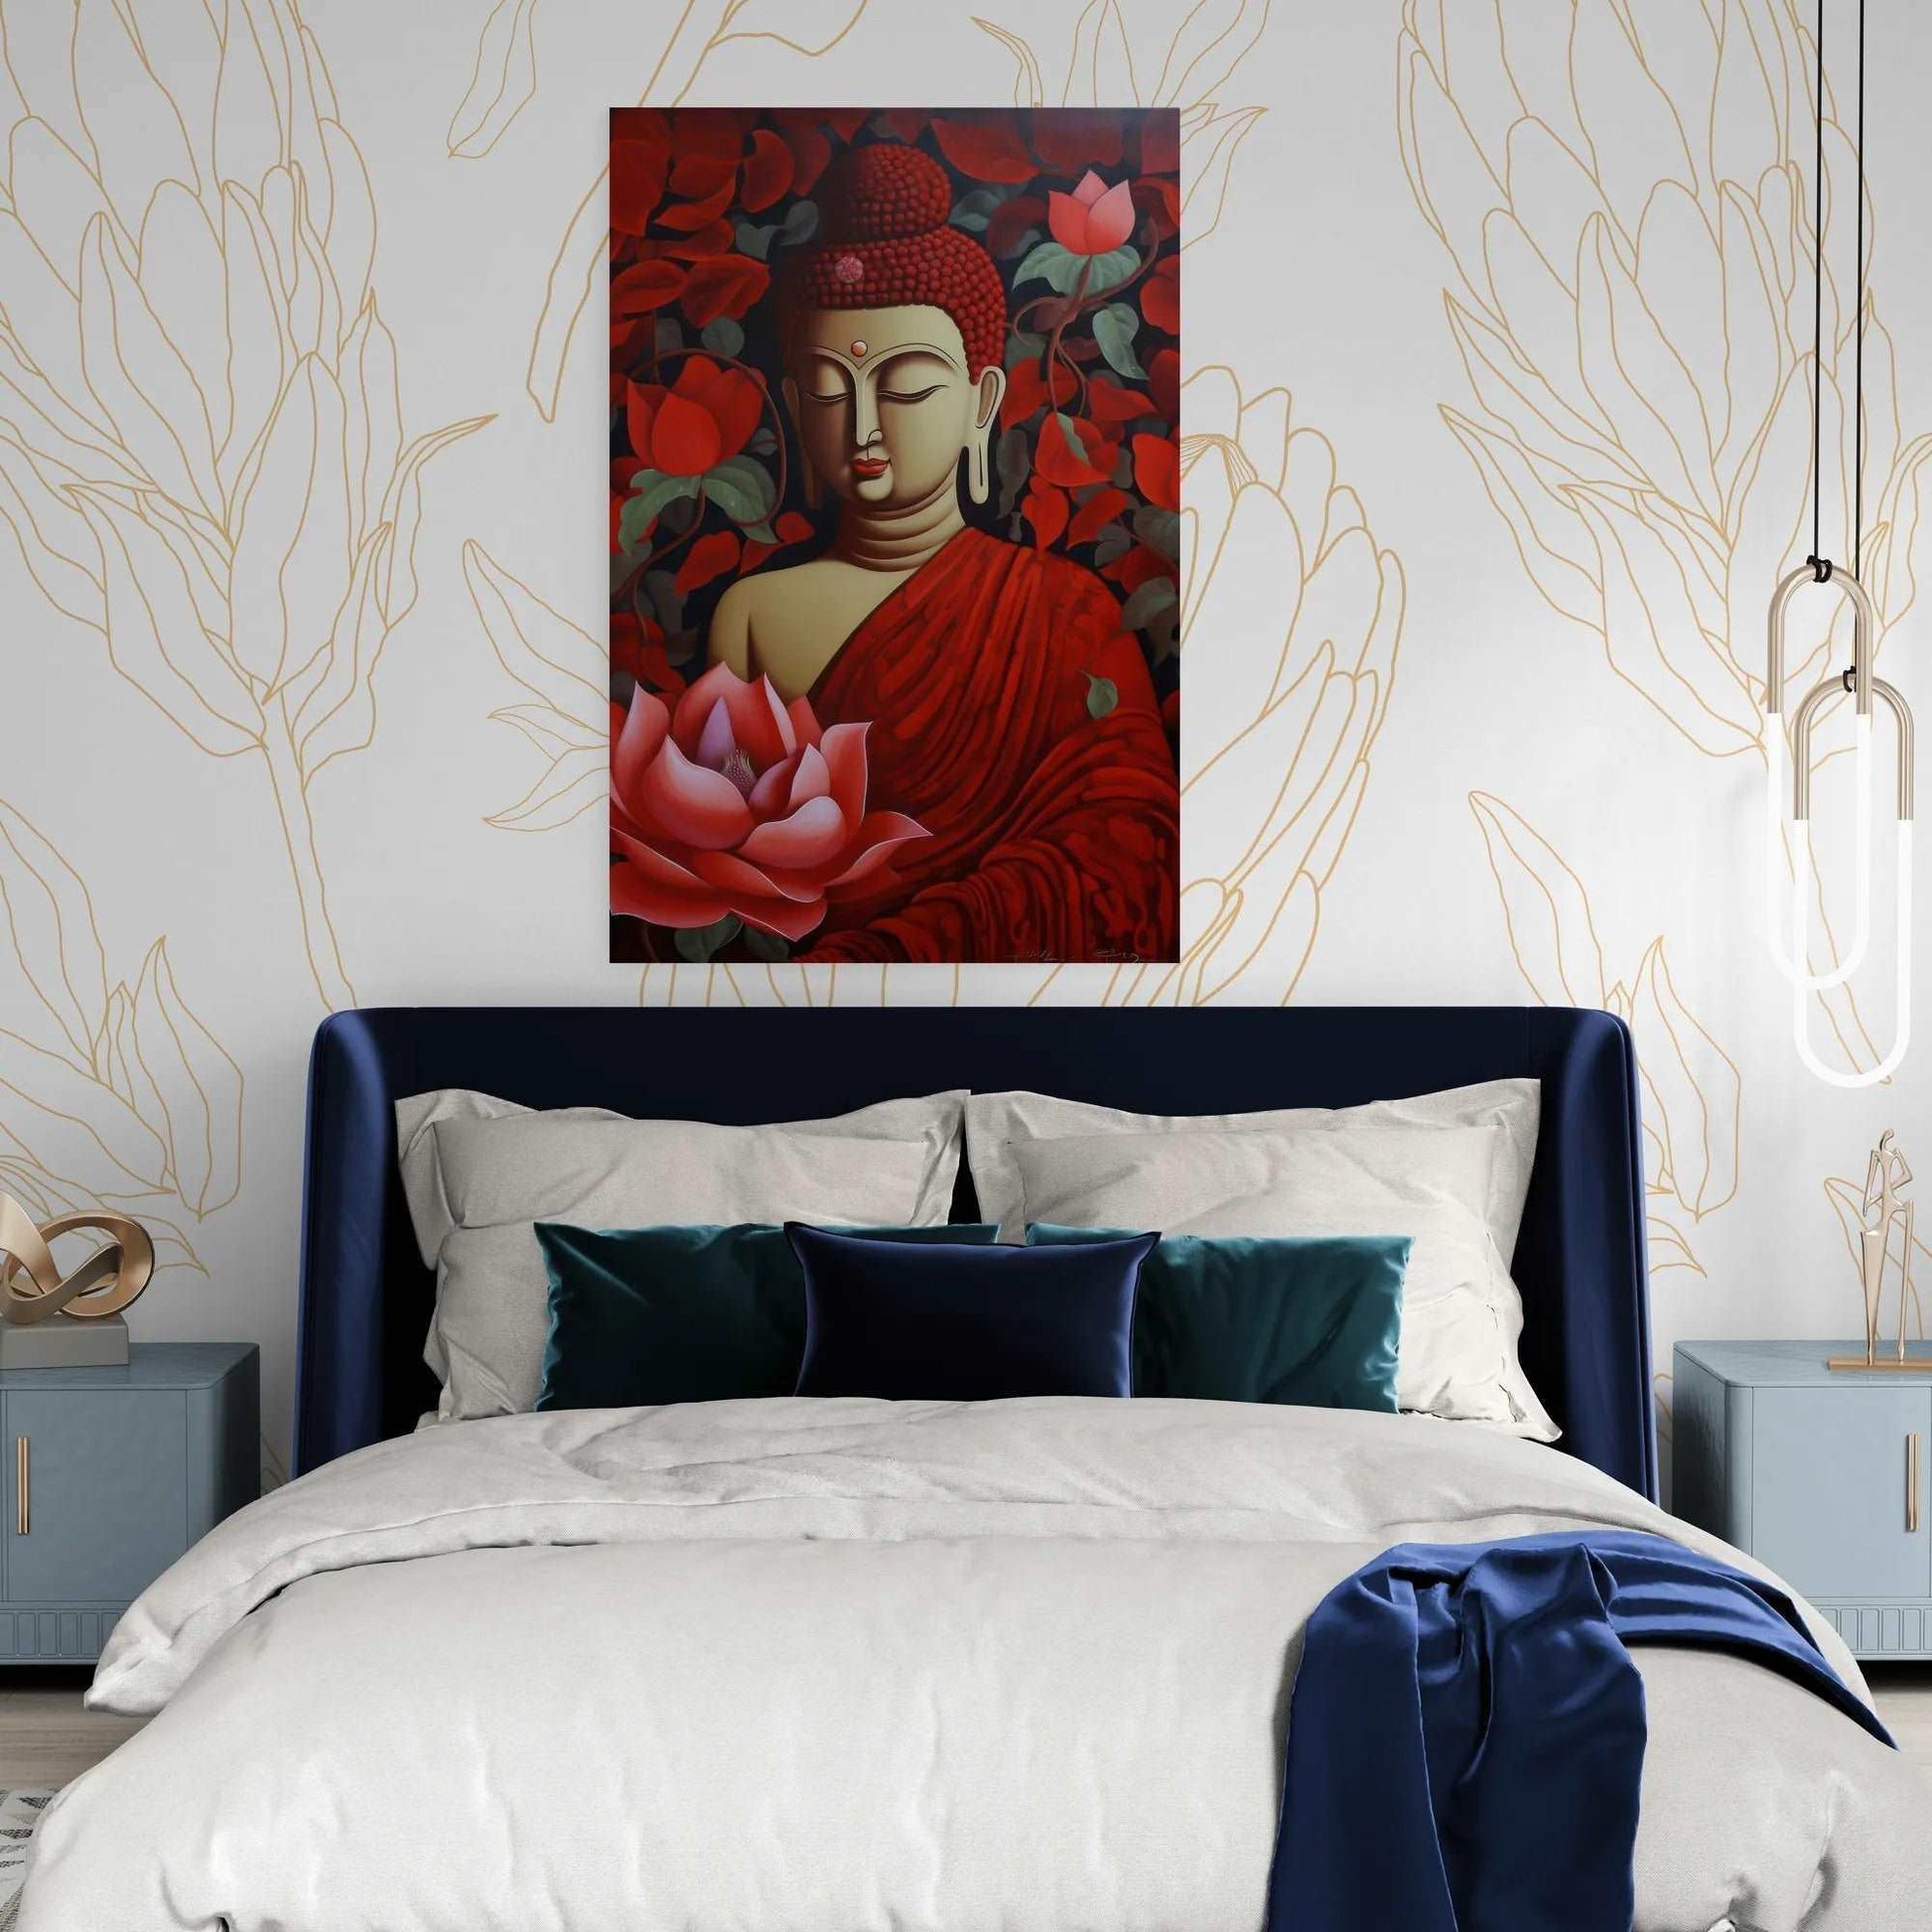 Red Buddha artwork with a large lotus flower, creating a serene focal point above a blue bed, harmonizing with the room's gold and white botanical wallpaper and luxurious bedding.